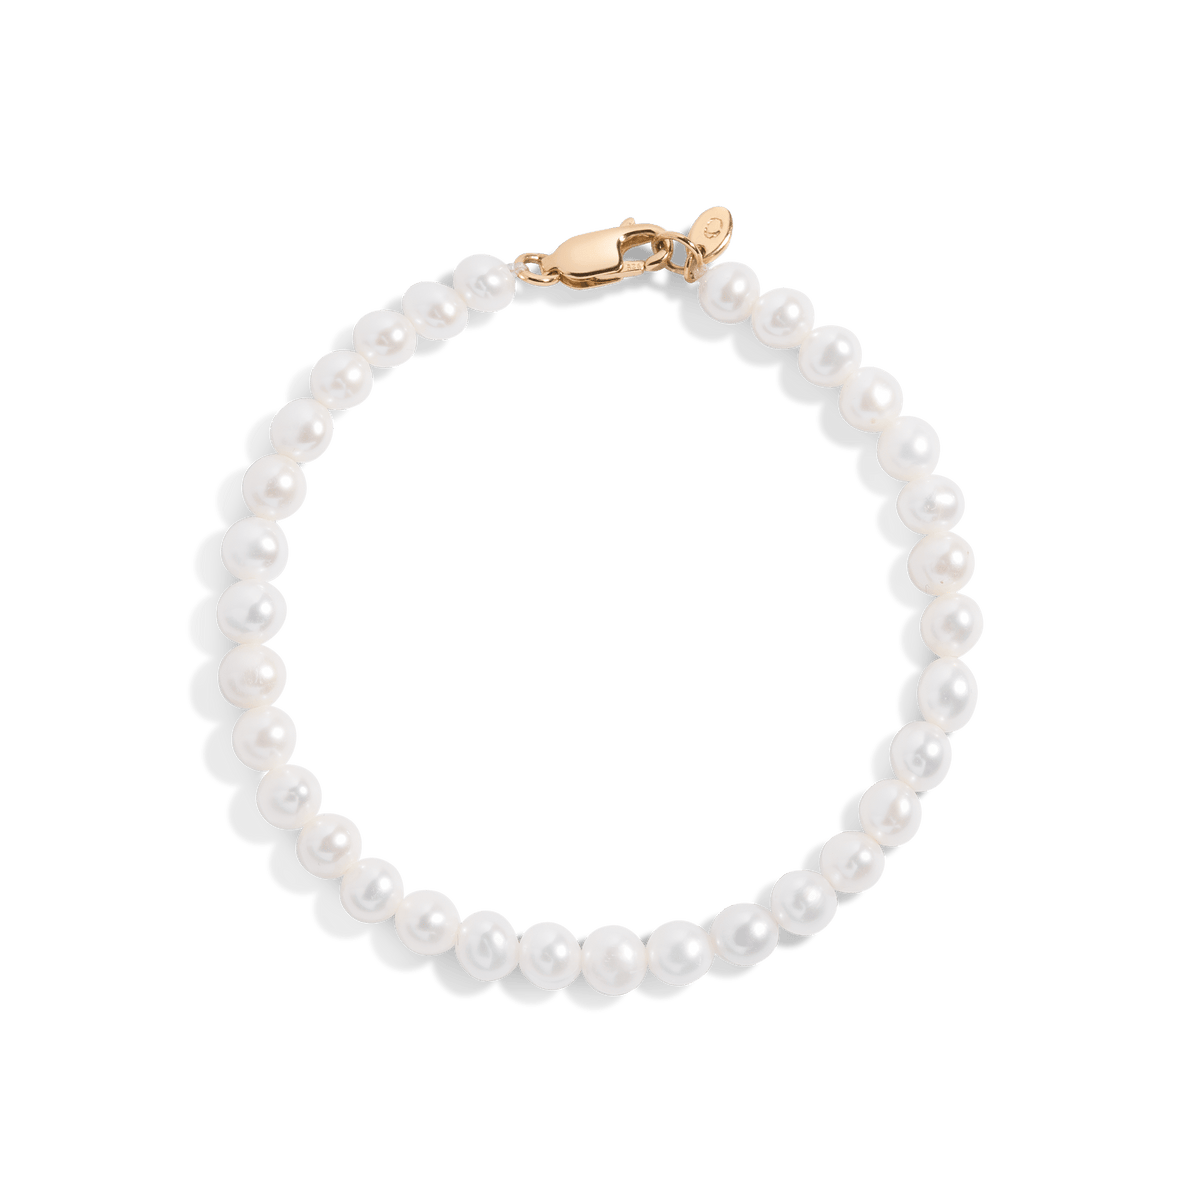 Certified Mother of Pearl 8mm Natural Stone Bracelet